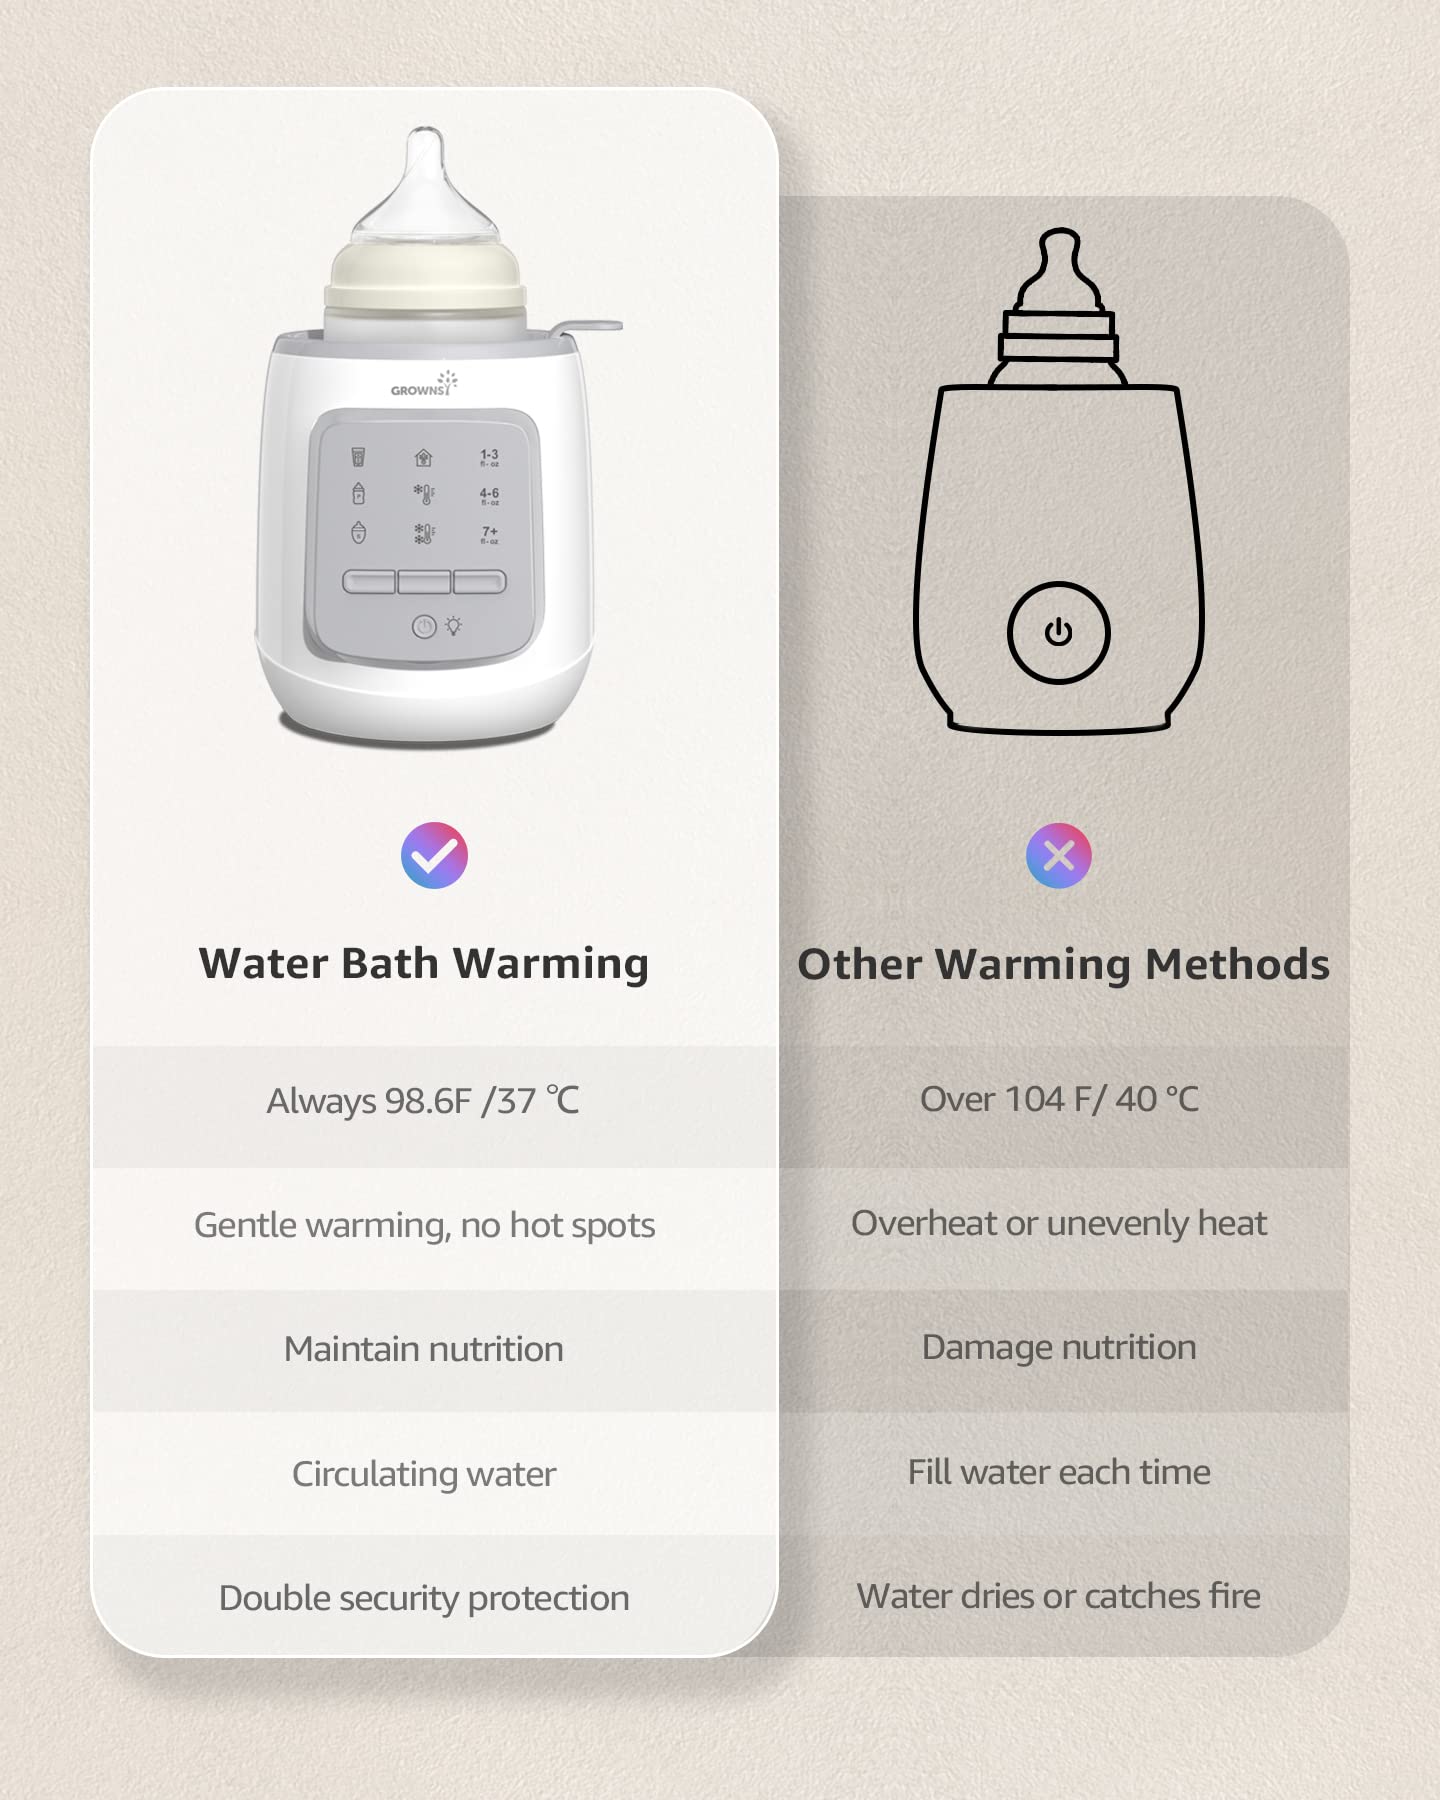 GROWNSY Bottle Warmer, 9-in-1 Water Bath Nutri Baby Bottle Warmer, Fast & Easy Milk Warmer for Breastmilk& Formula, Auto Timer, Defrost, Steri-lize, Warms Baby Milk to Body Temp and Maintain Nutrients